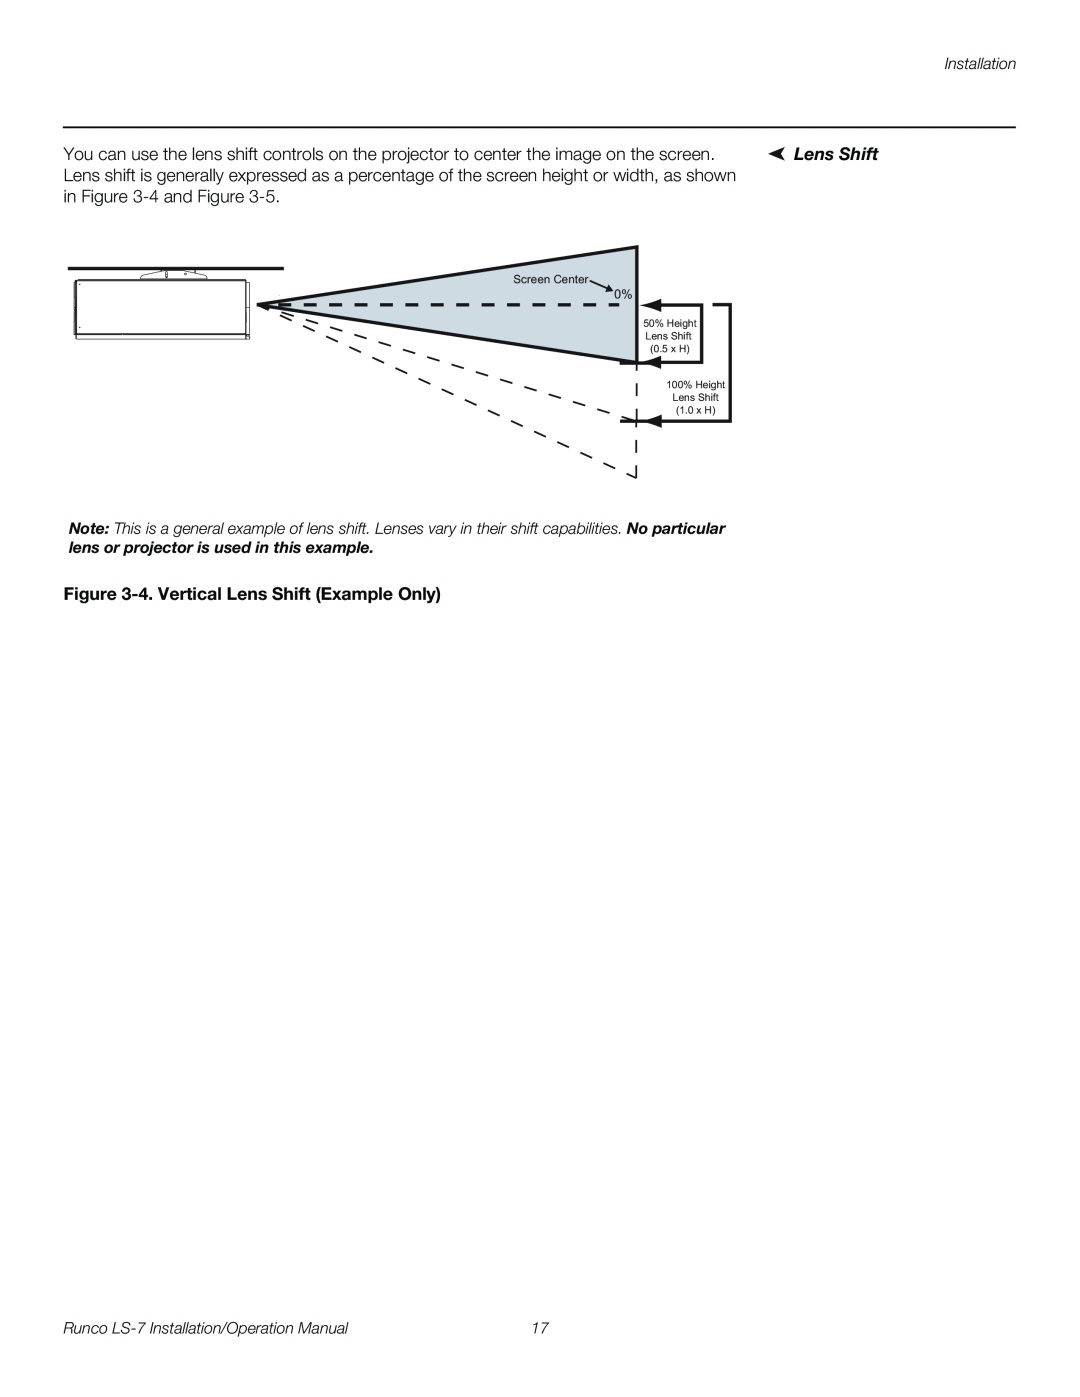 Runco LS-7 operation manual 4.Vertical Lens Shift Example Only 